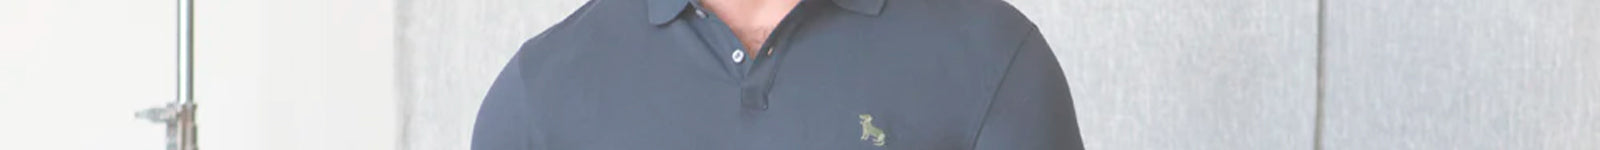 Polo shirts for men